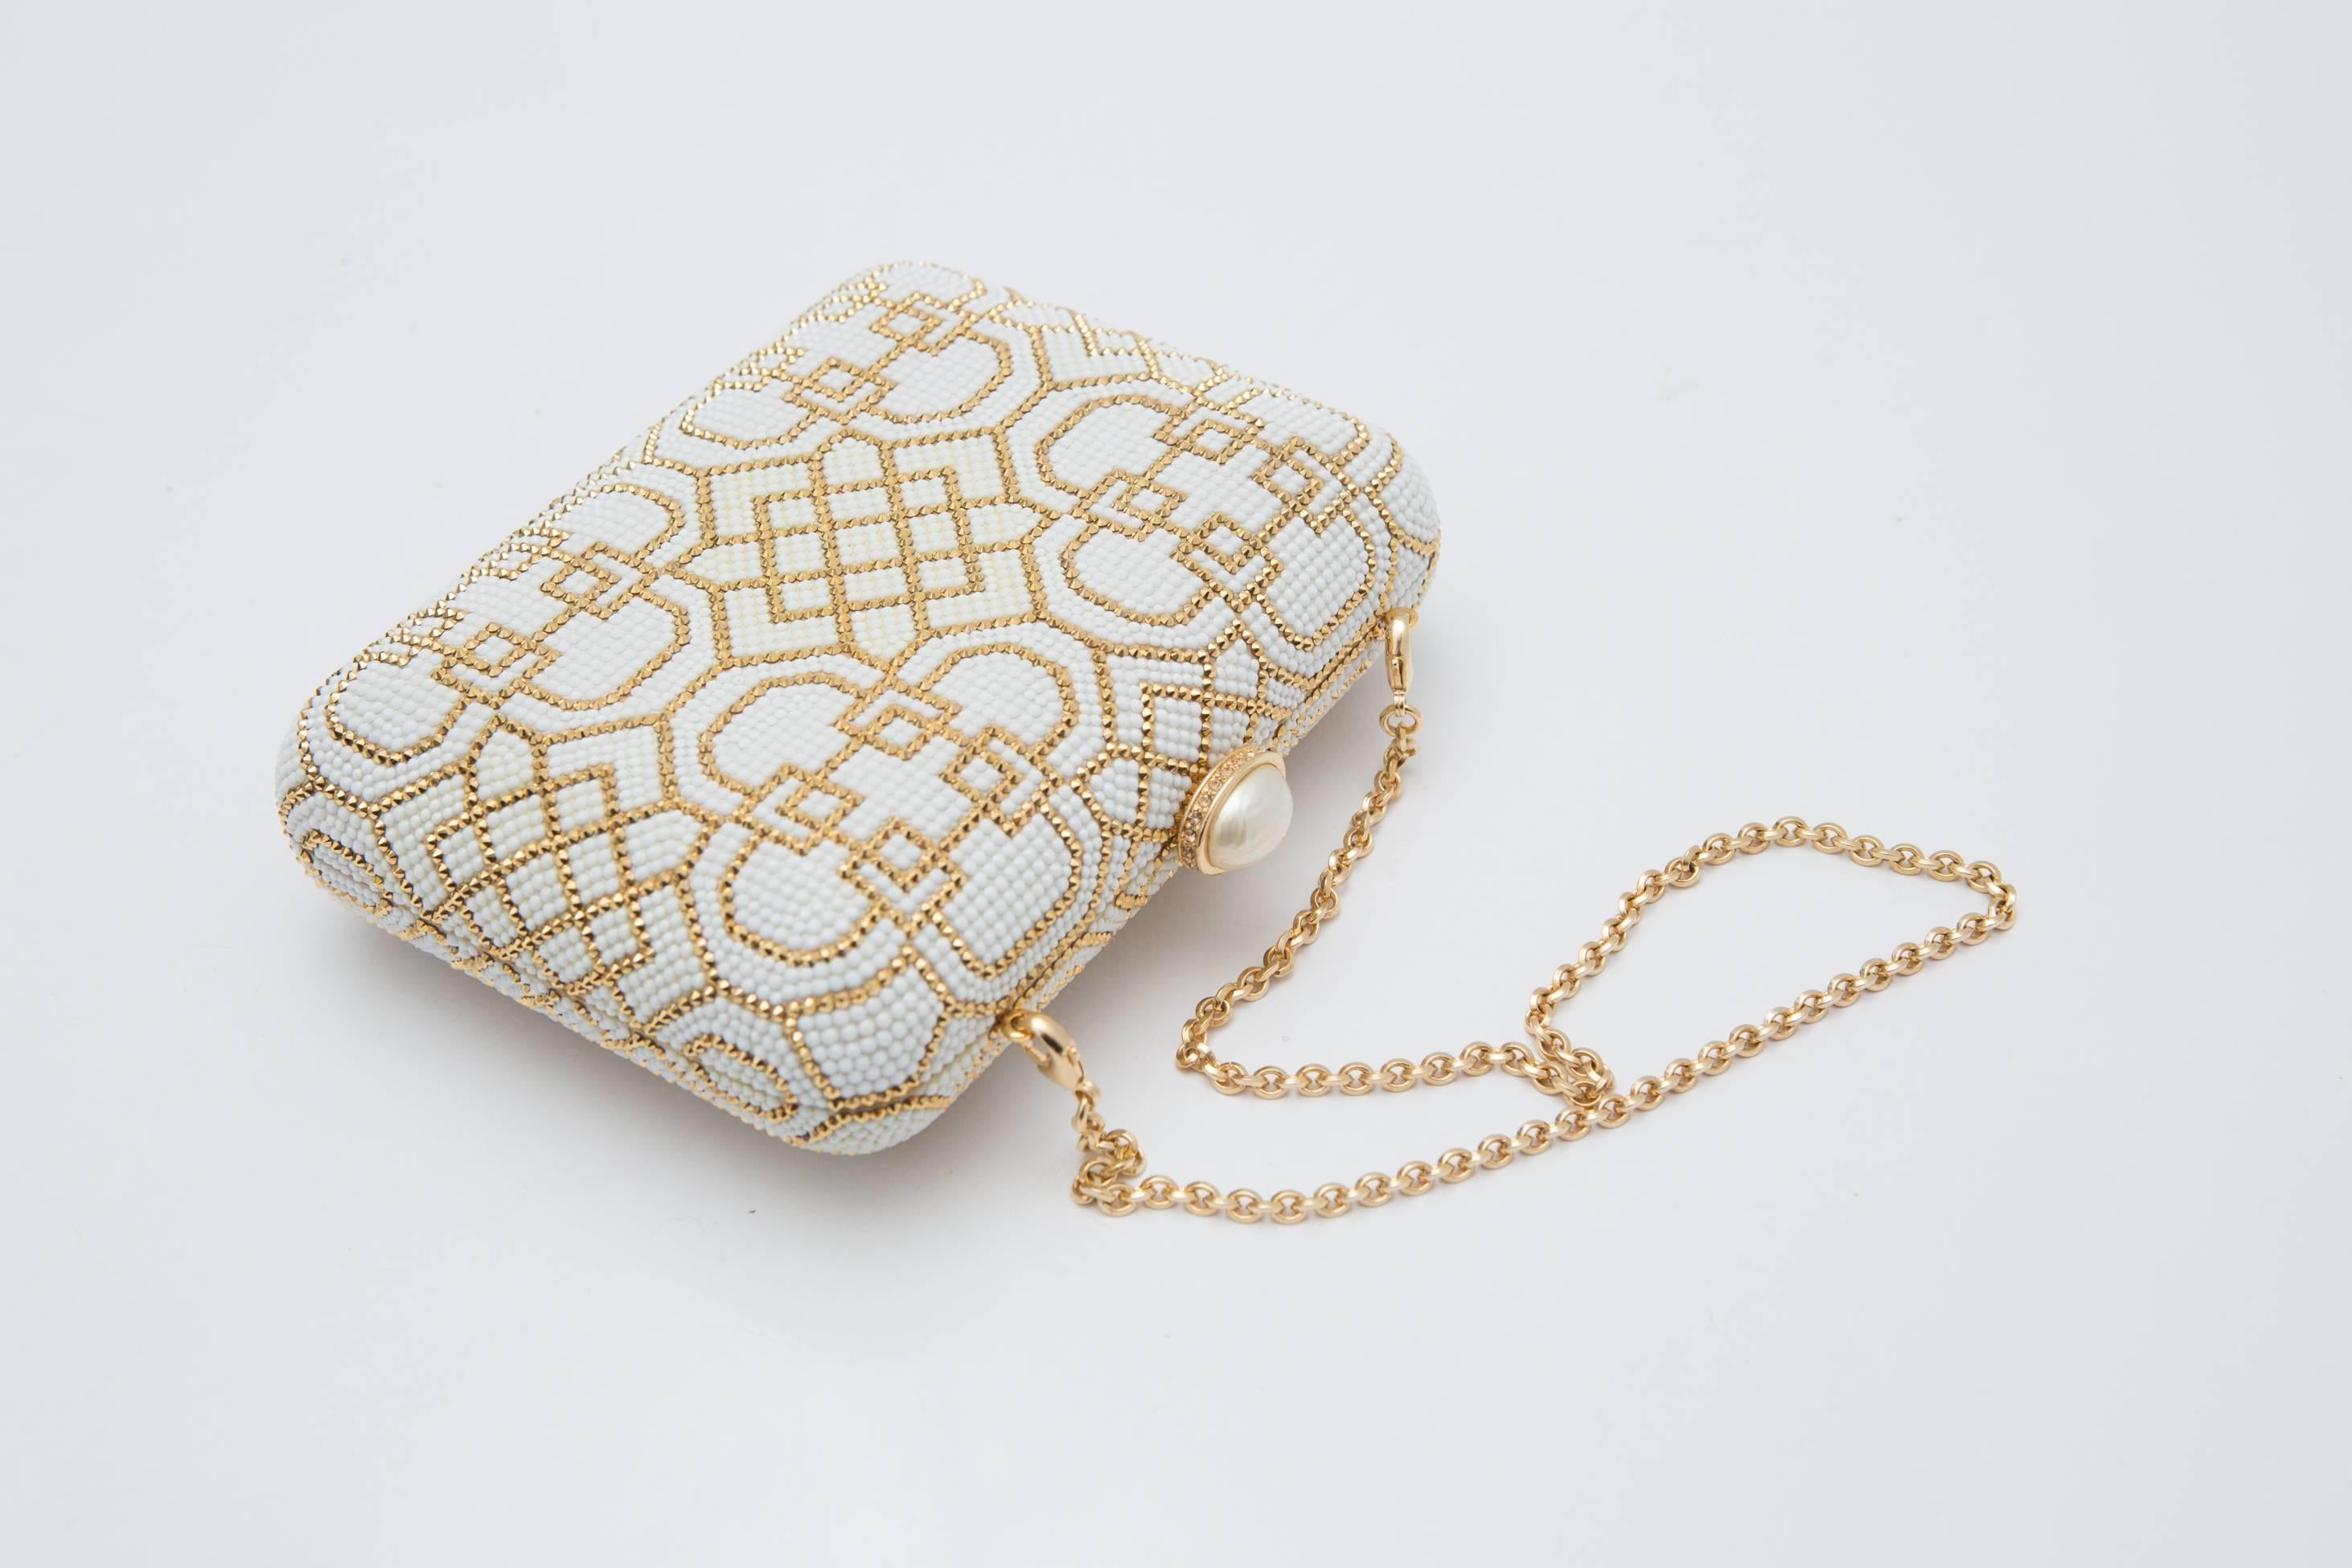 Gray Judith Leiber Ivory and Gold Patterned Clutch 